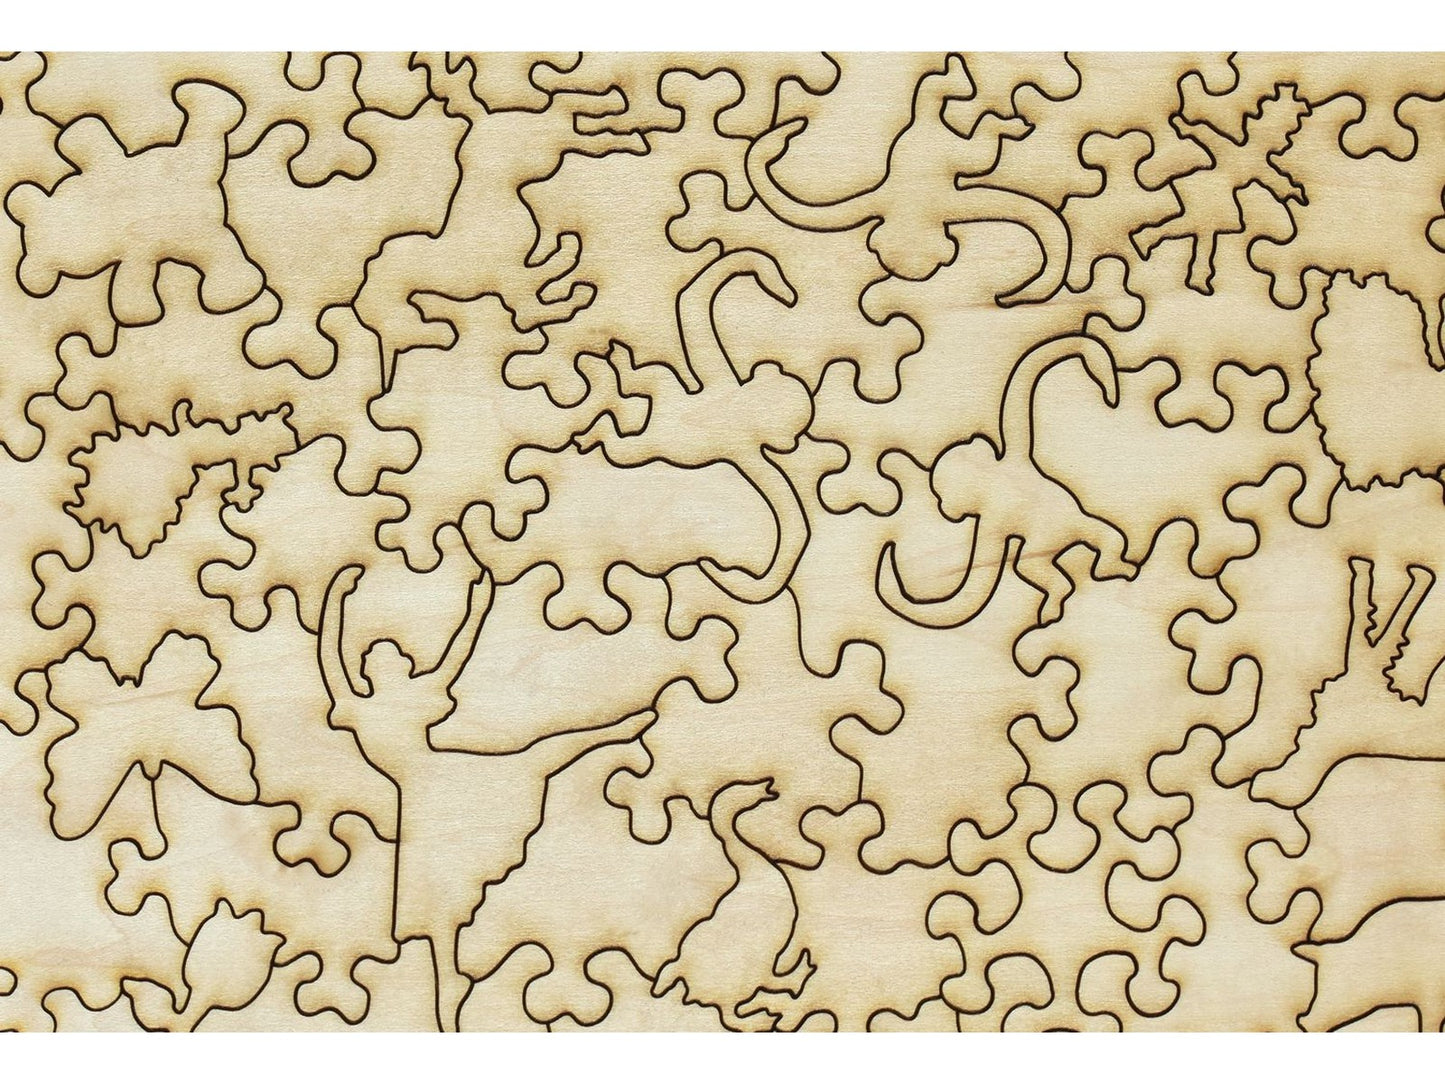 A closeup of the back of the puzzle, Little Dog Laughed.